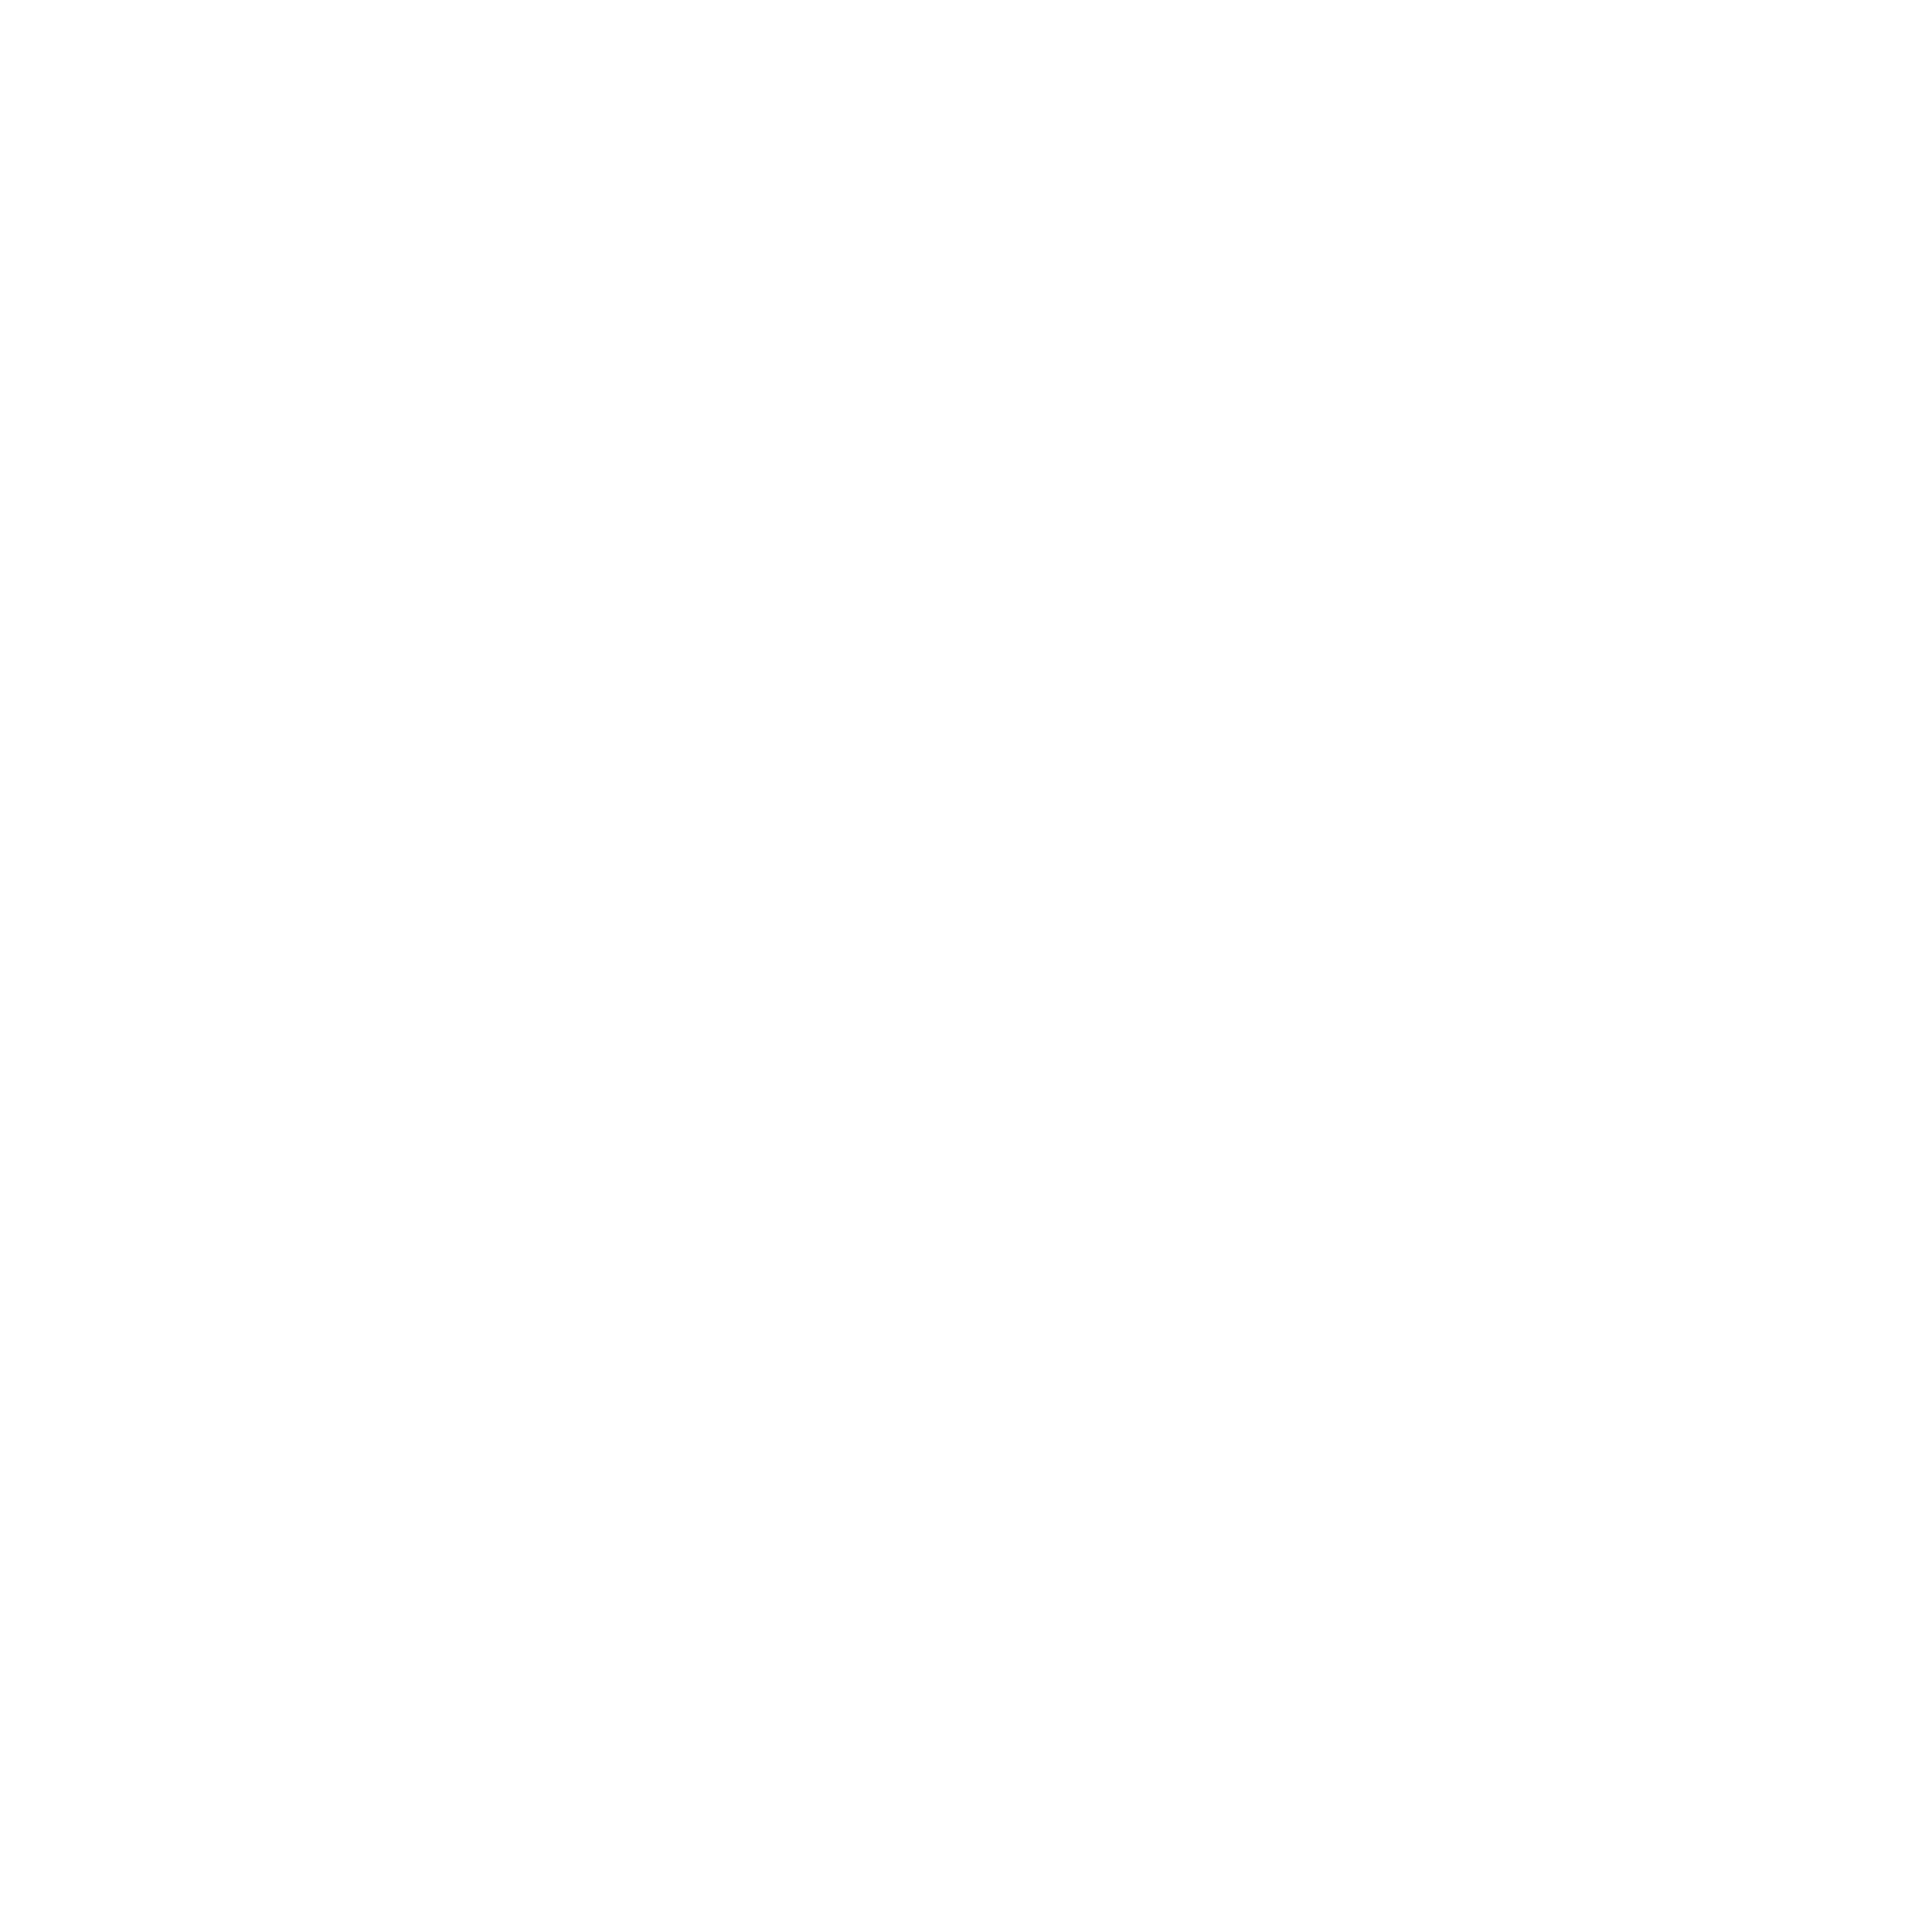 Request your free hubspot demo 